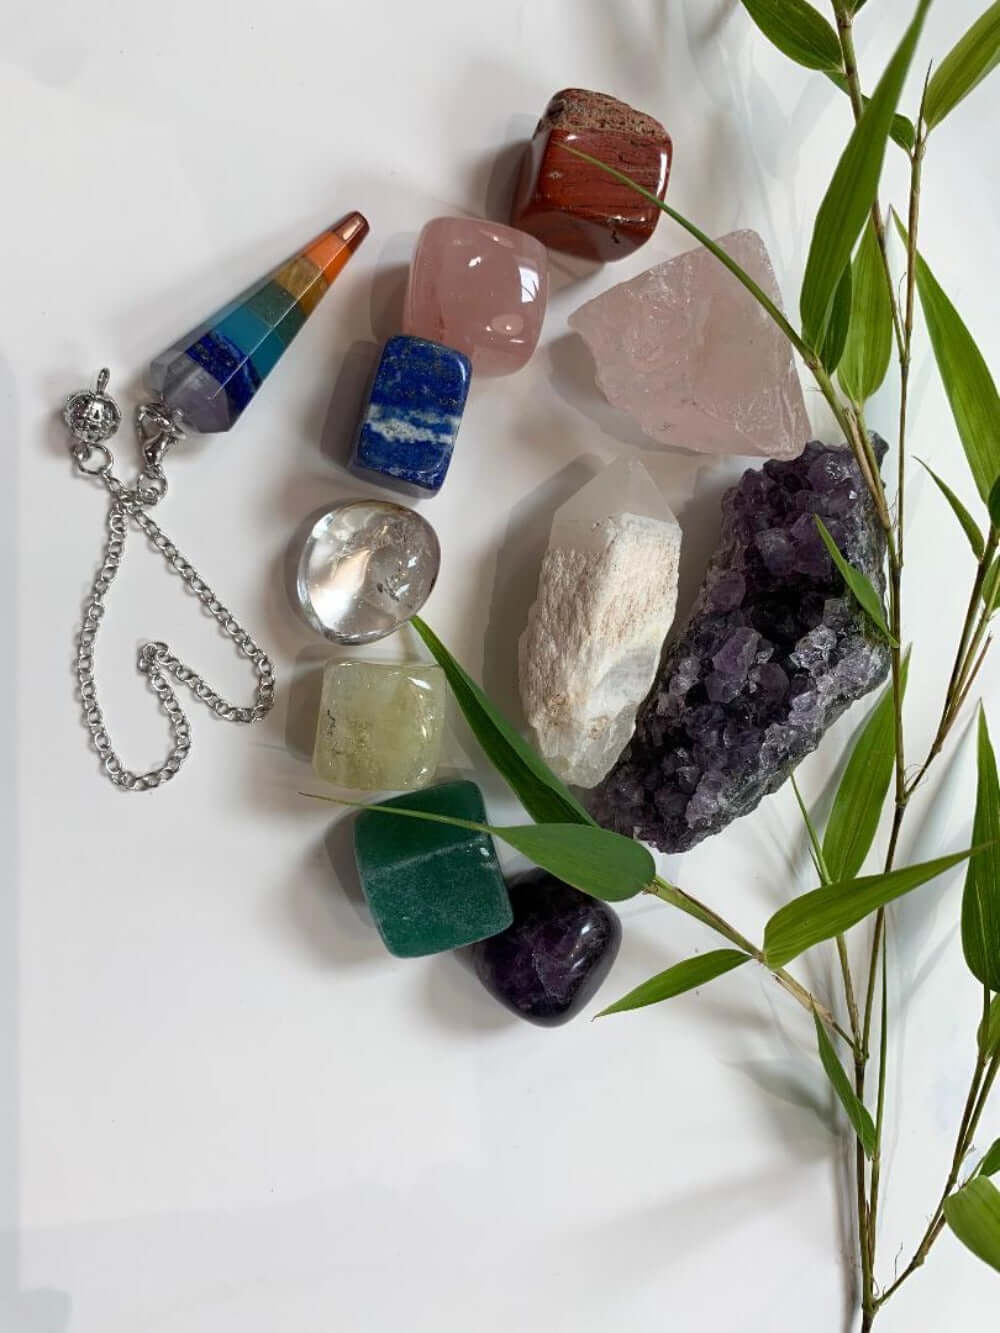 Crystal 7 Chakra Necklace with Stones for Chakra Healing – Crystalline Dream